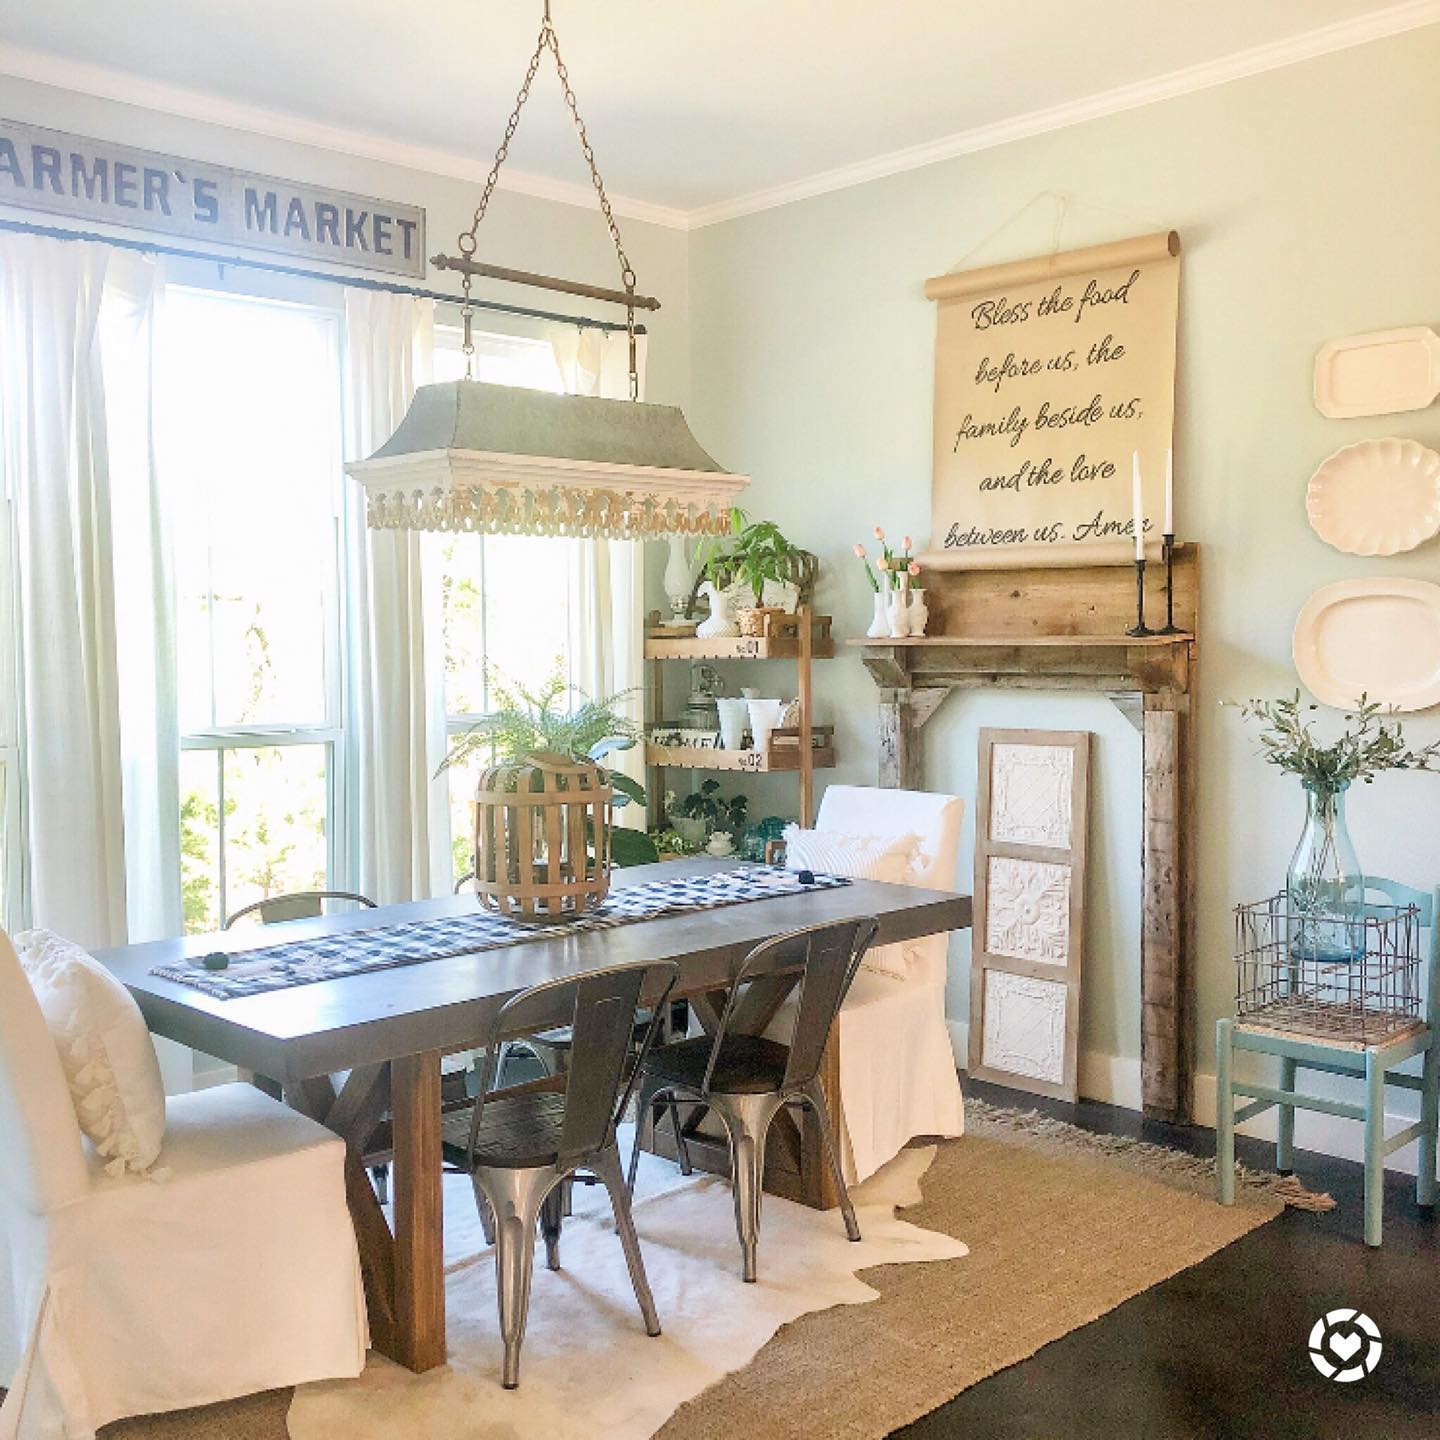 How to create a cozy atmosphere with farmhouse light fixtures